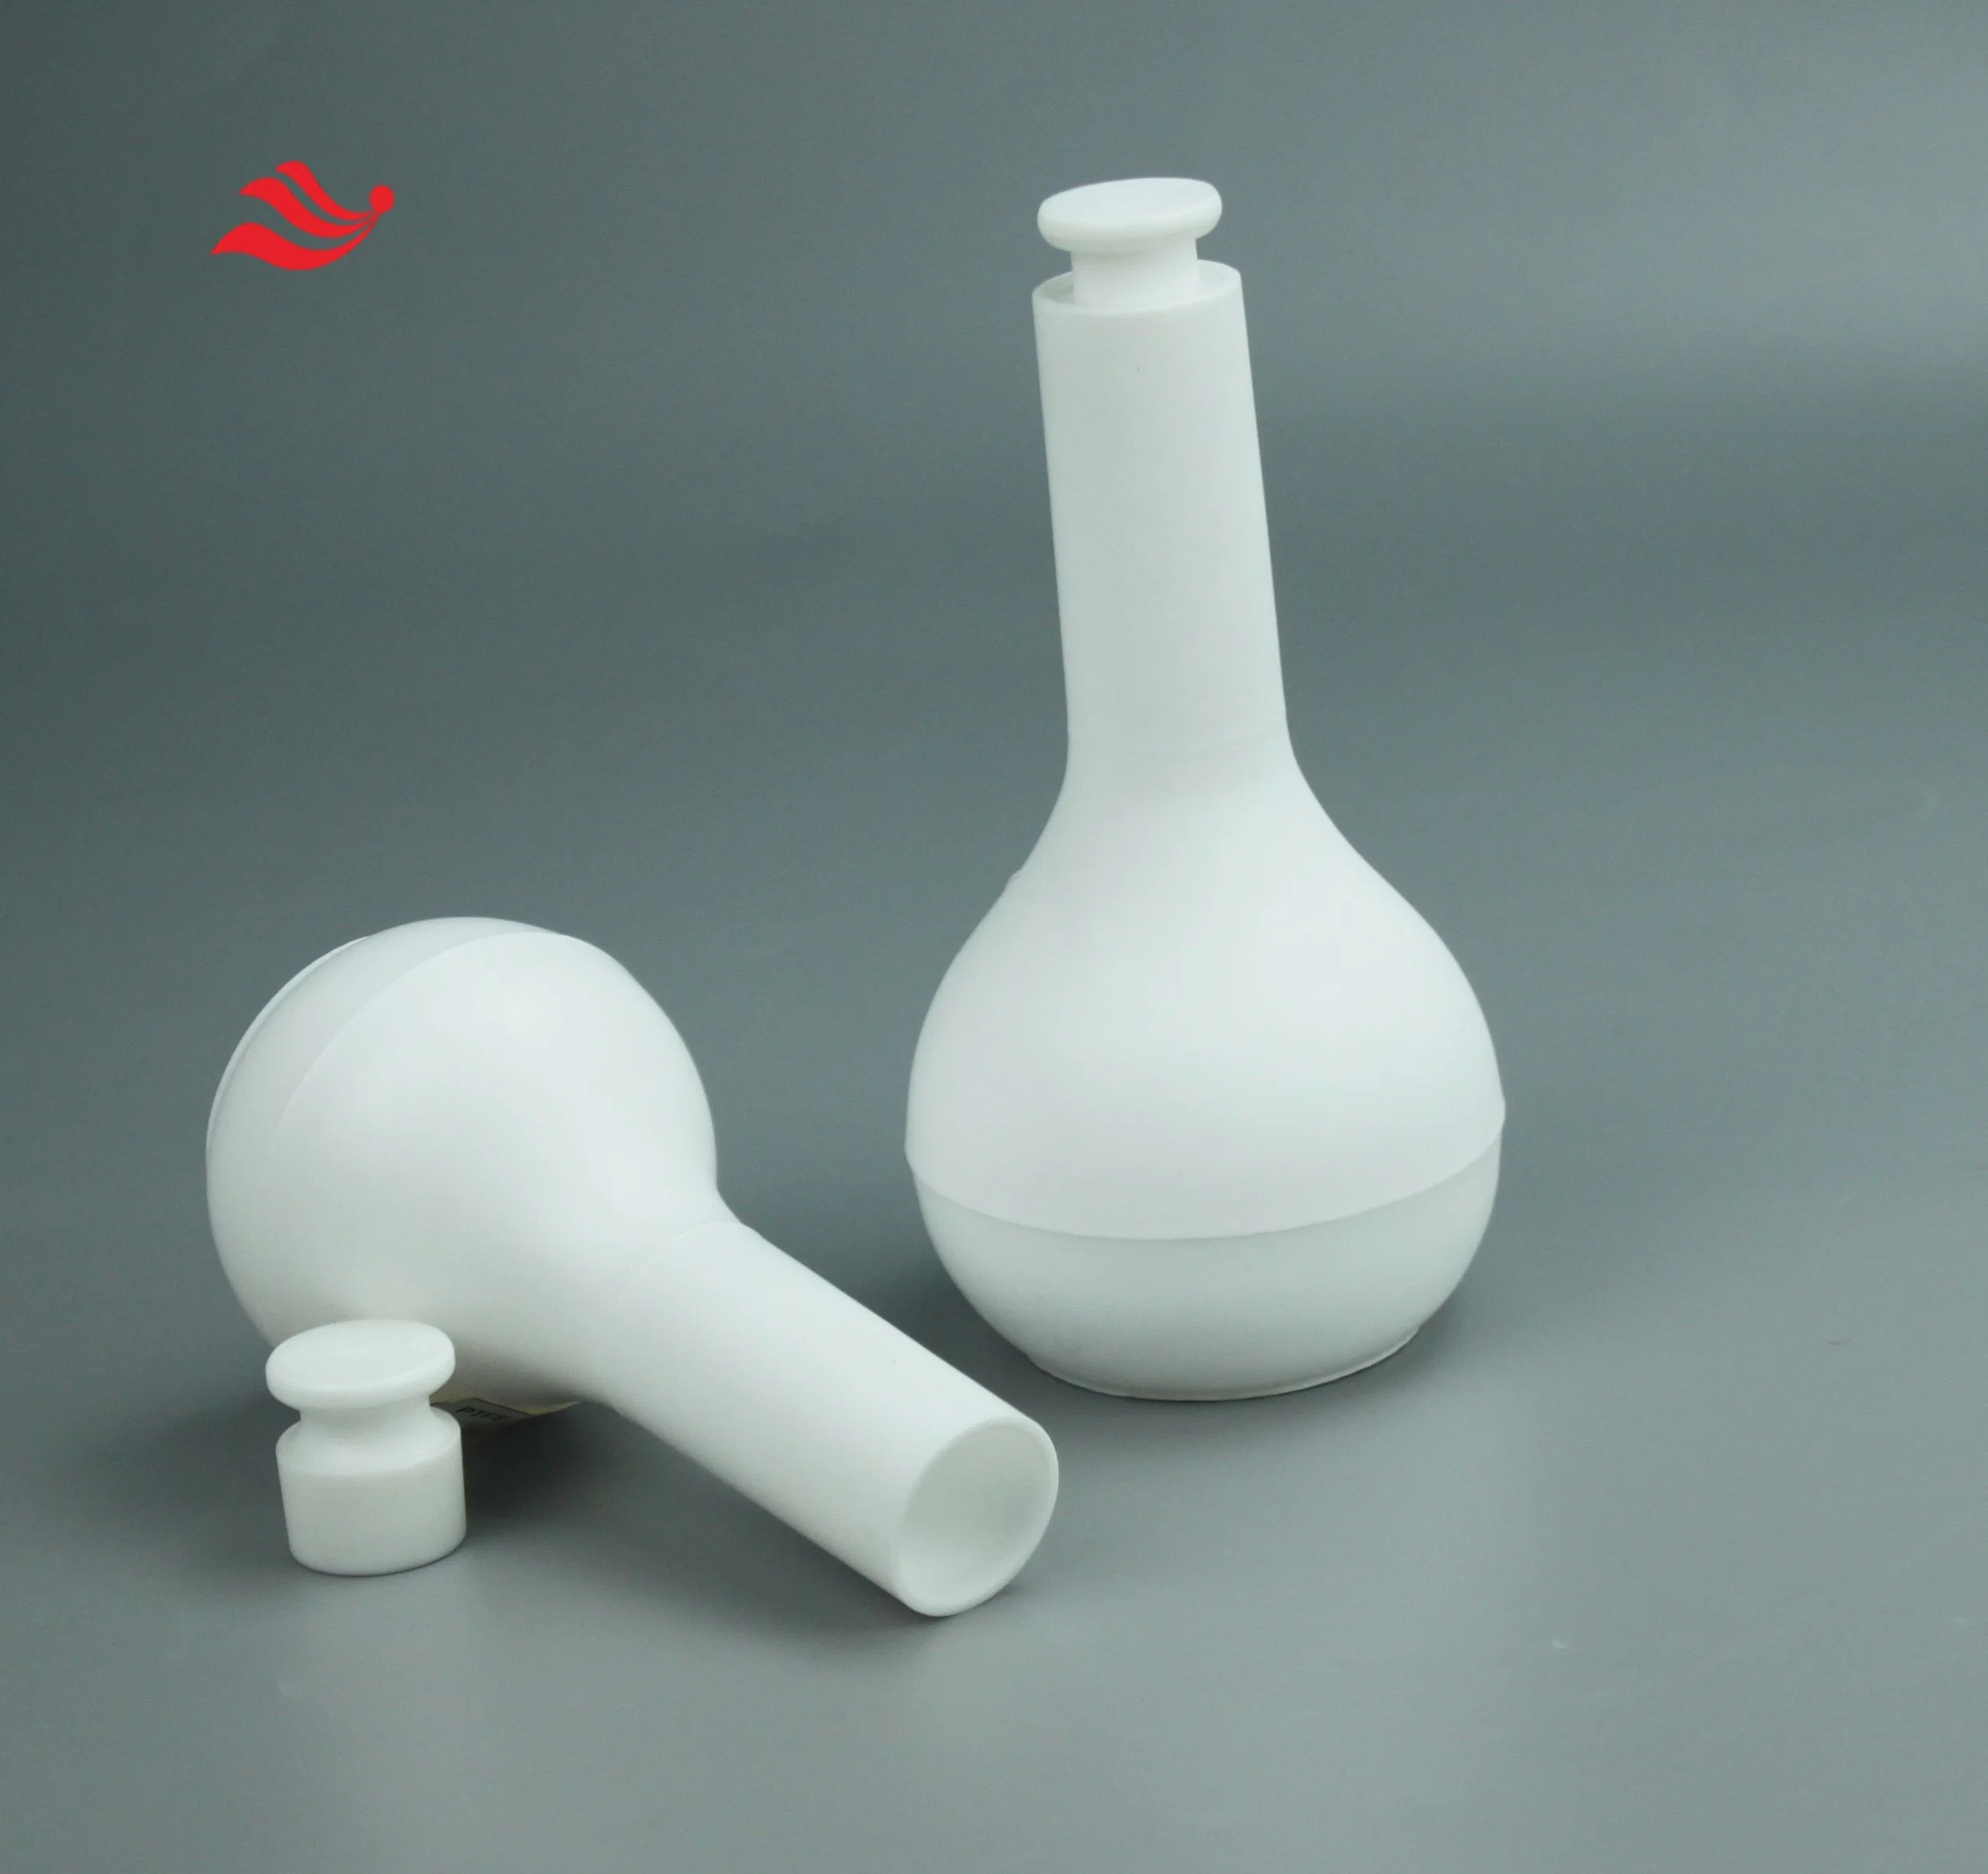 2000ml Single-Neck Flask with Condenser Tube Condensing Reflux Device, The Number of Necks